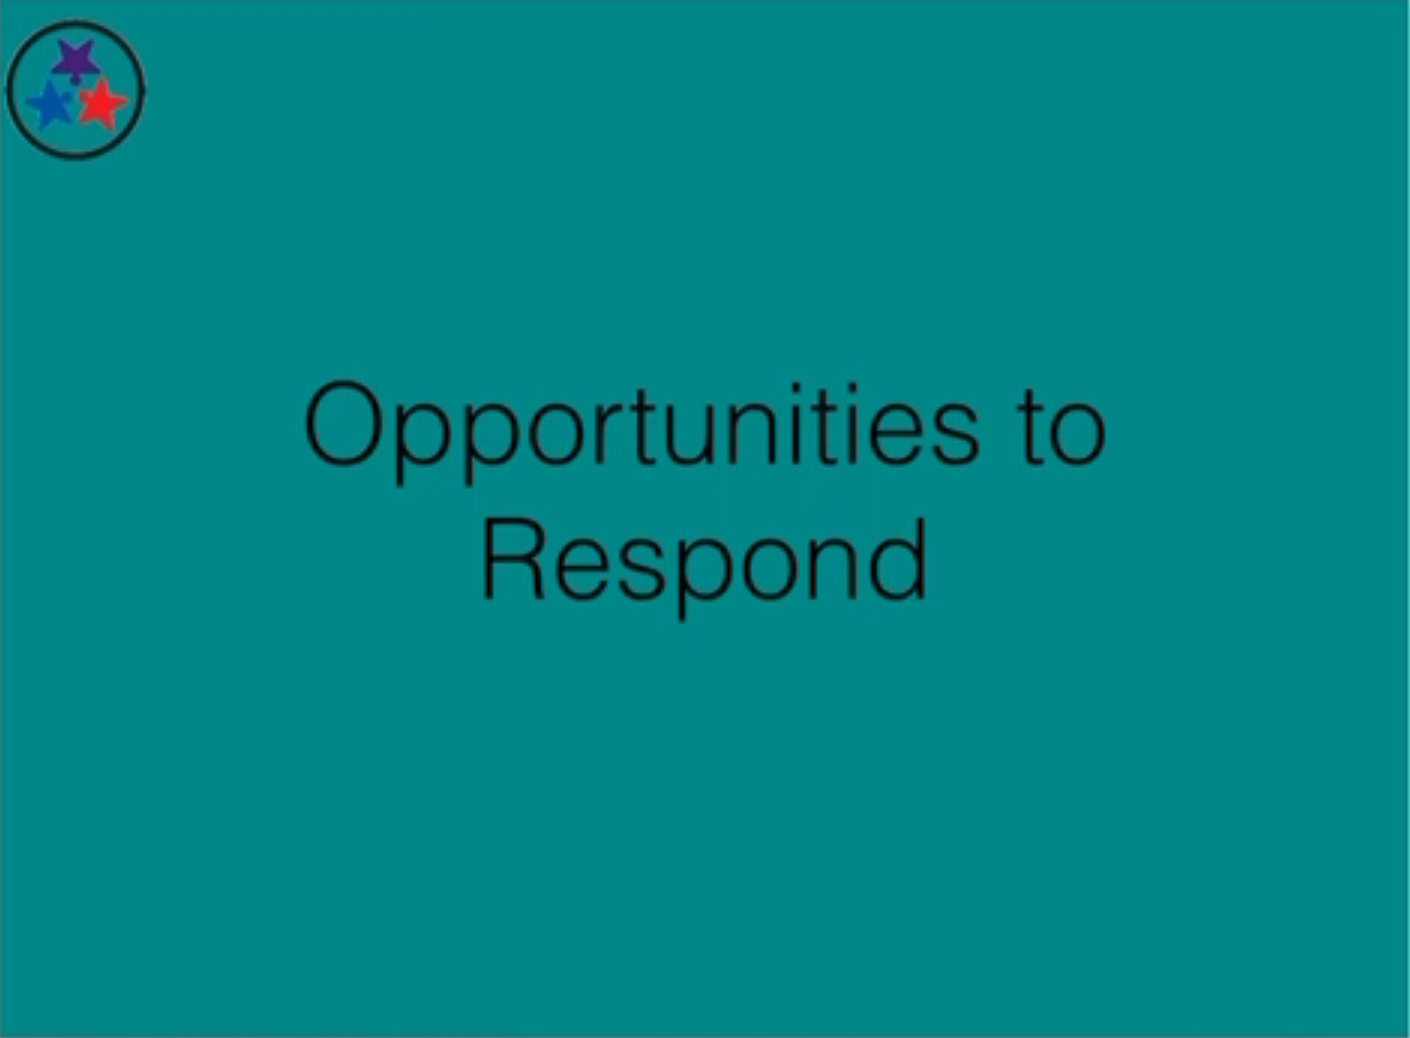 Classroom Management 5 - Opportunities to Respond